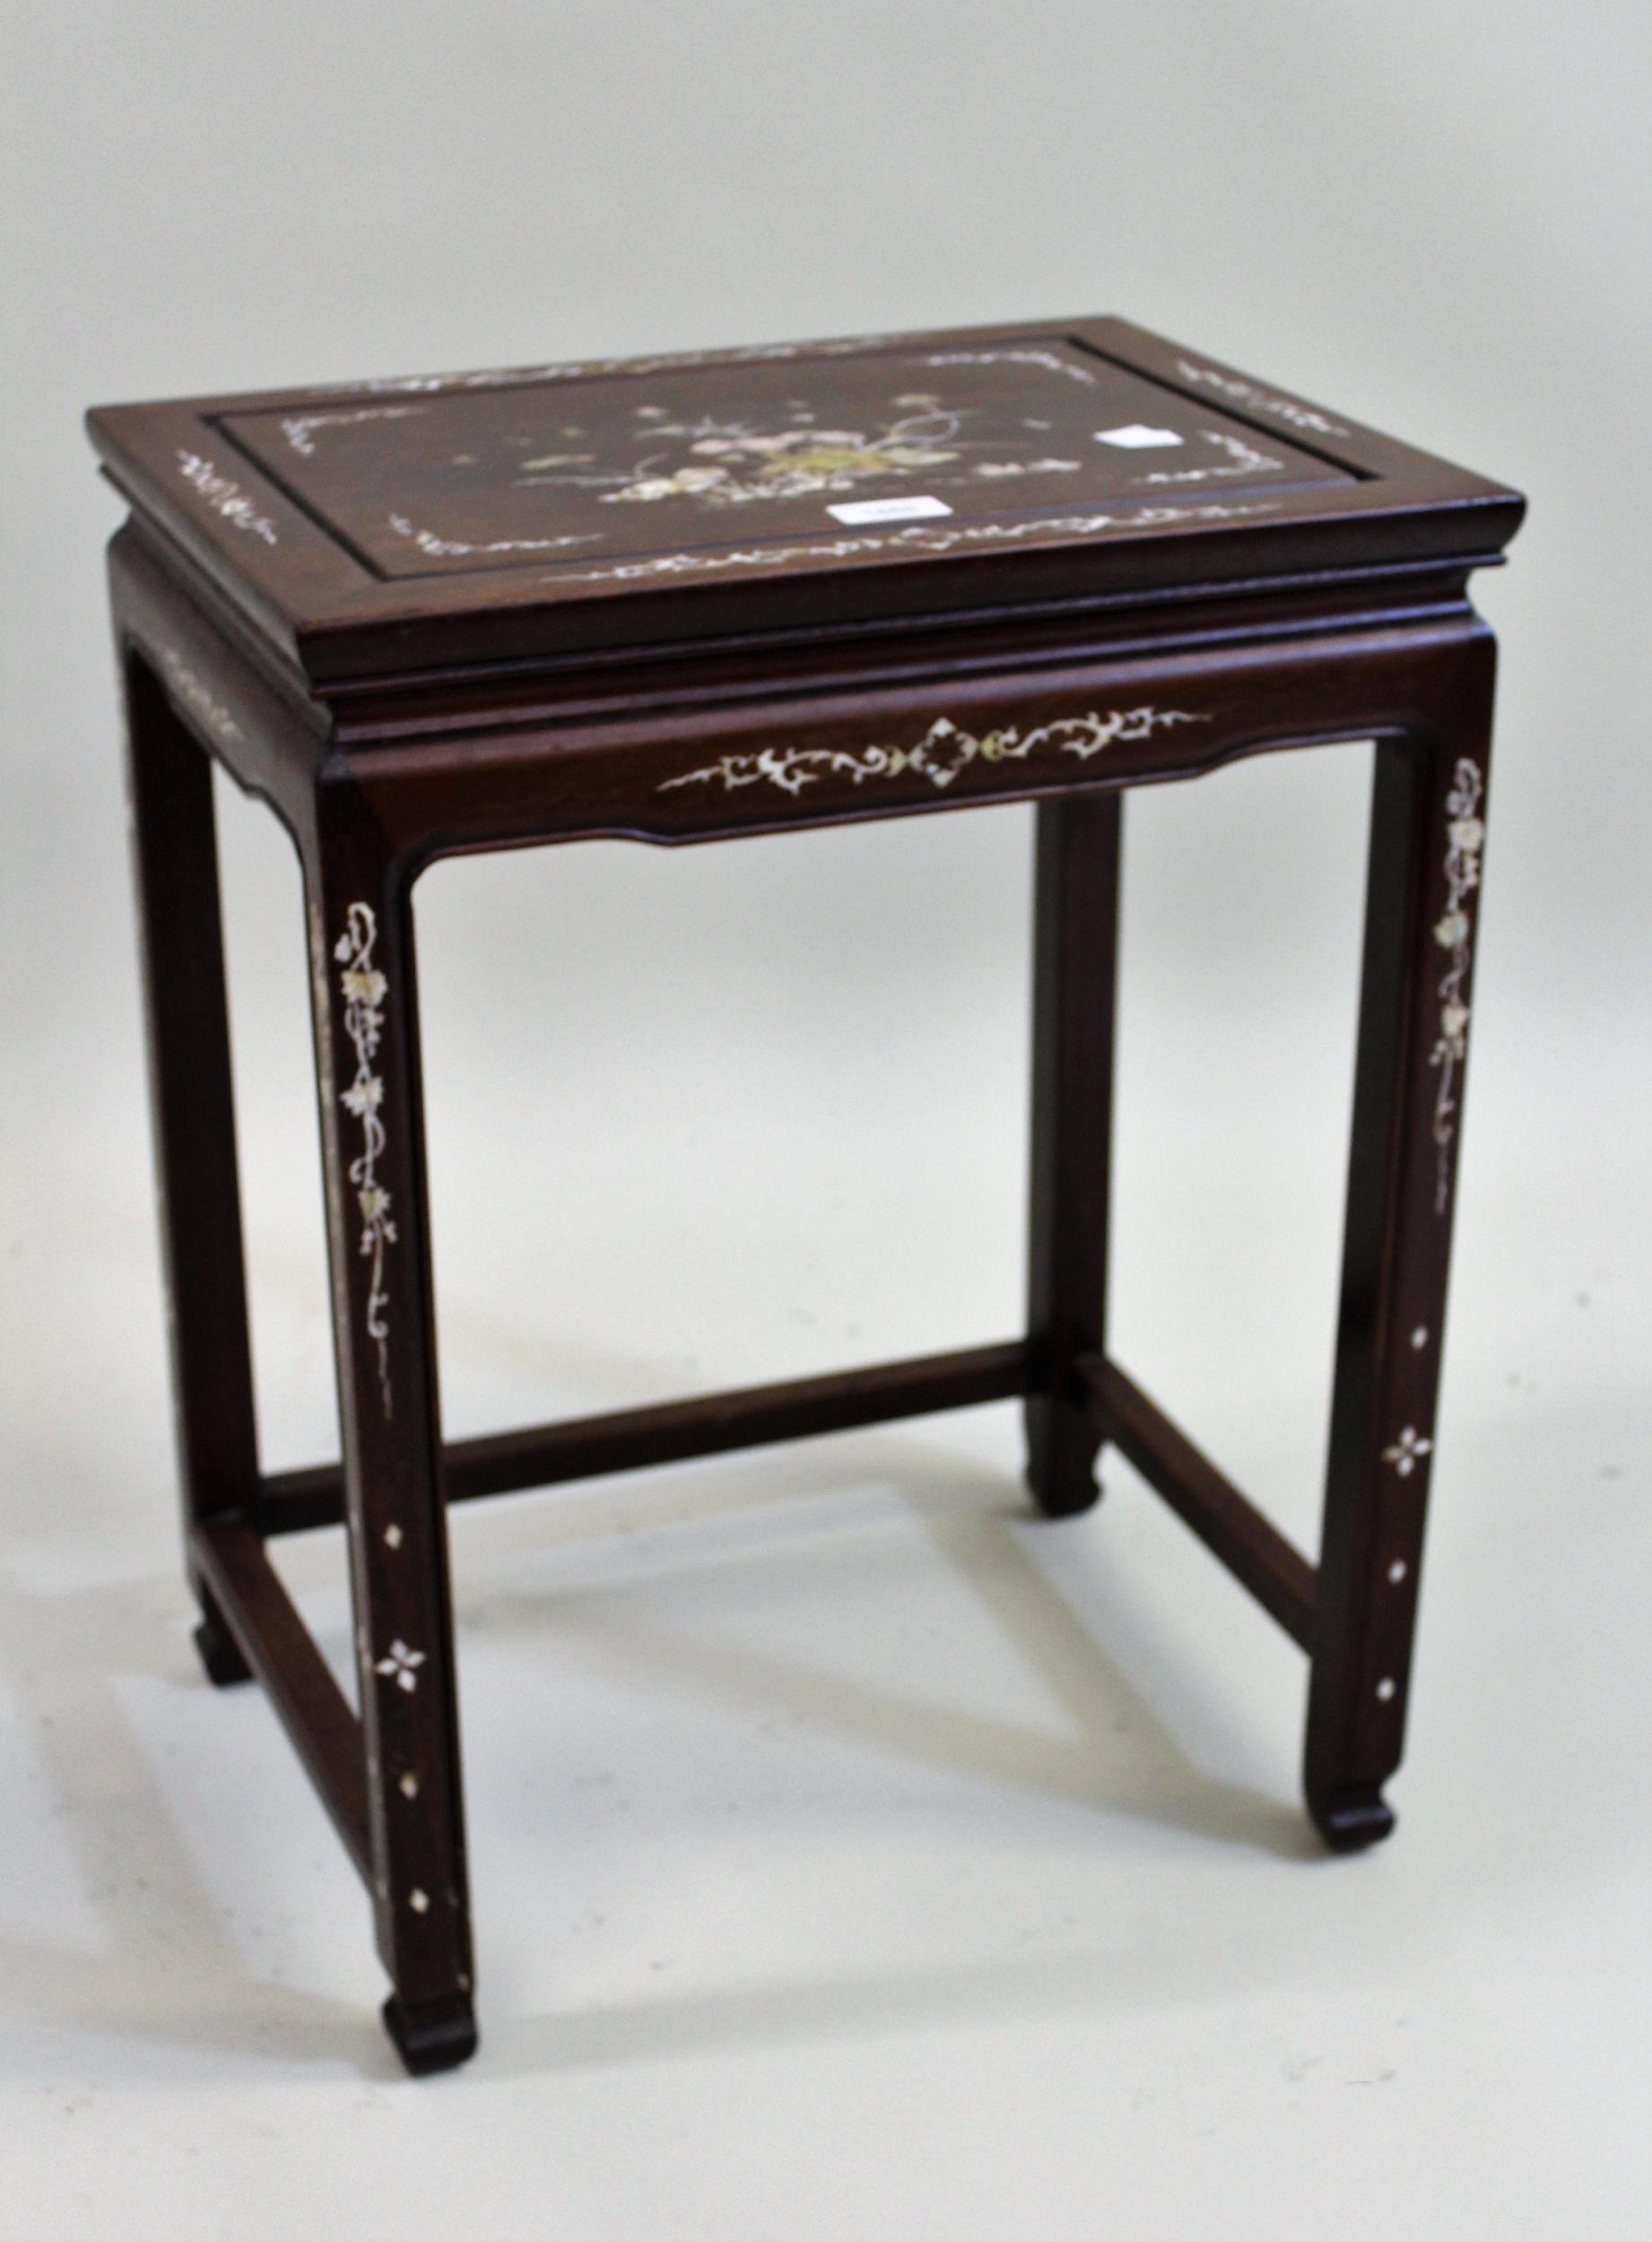 Chinese rectangular hardwood and mother of pearl inlaid occasional table, 43 x 33 x 56cms high